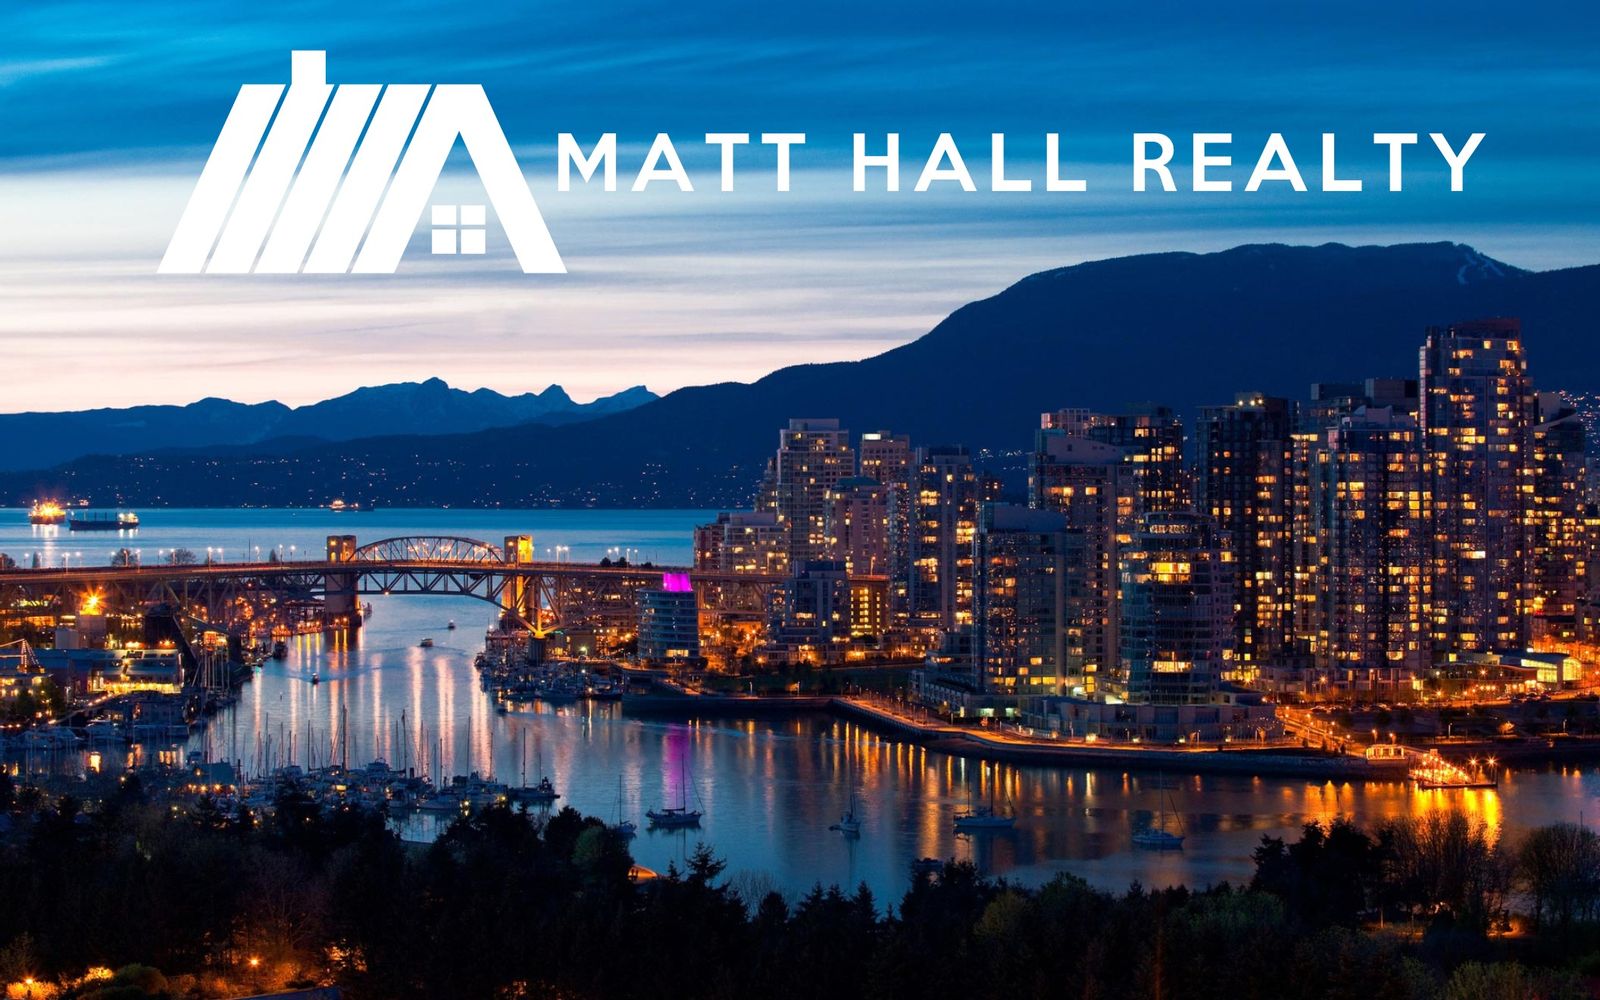 Matt Hall Real Estate Services Are Here!